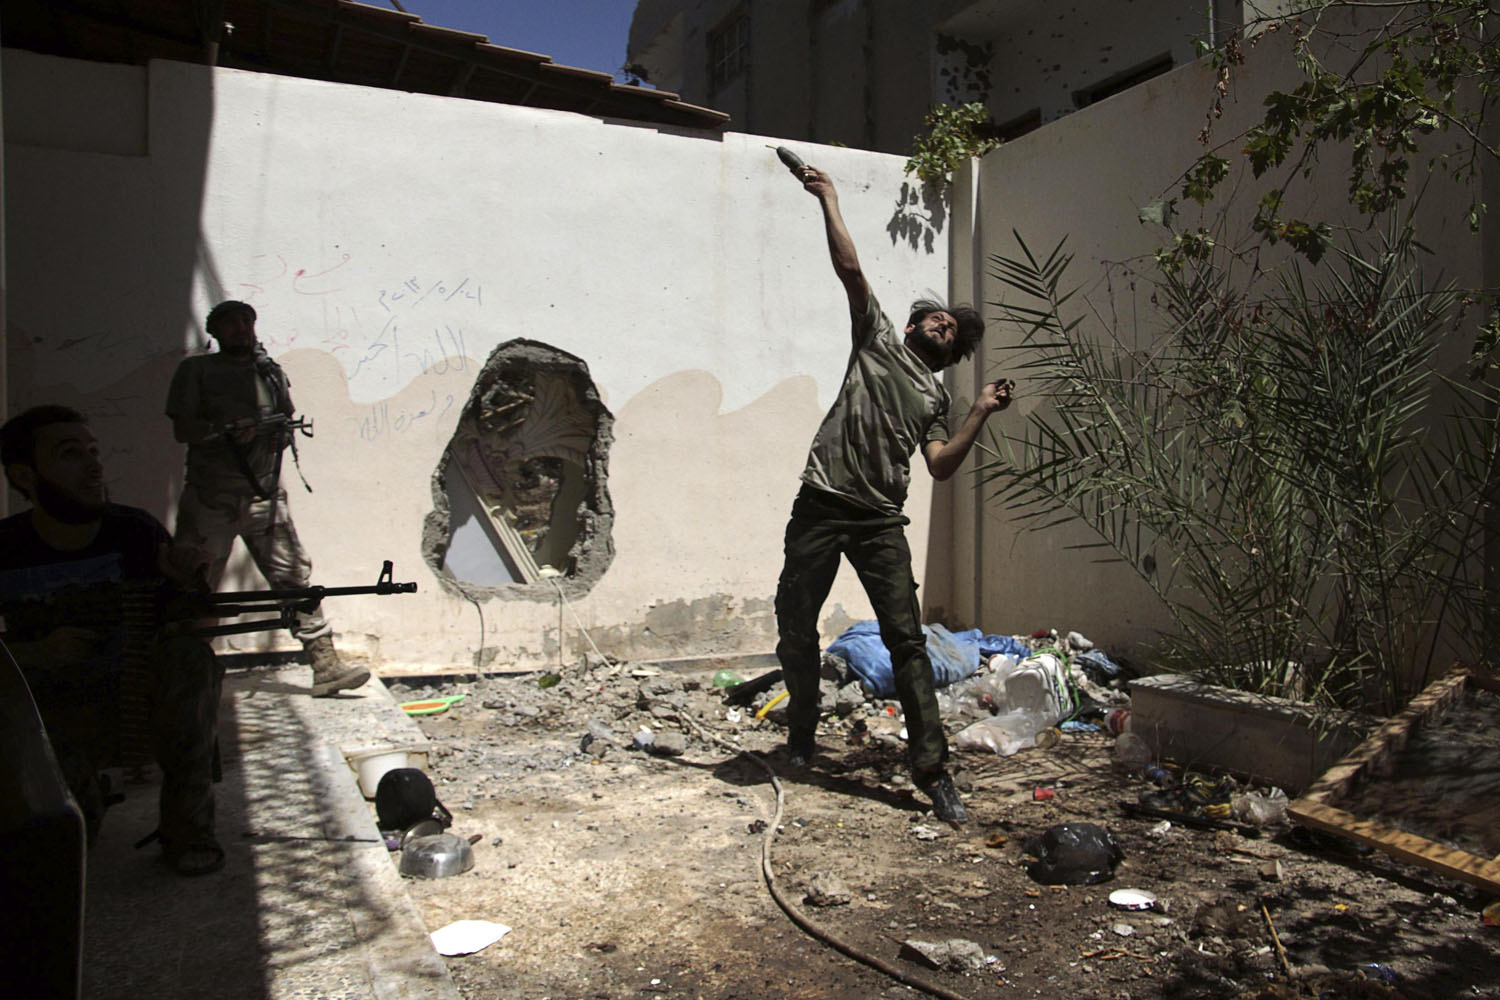 July 14, 2013. A Free Syrian Army fighter throws a homemade bomb towards forces loyal to Syria's President Bashar al-Assad as fellow fighters watch in Deir al-Zor.